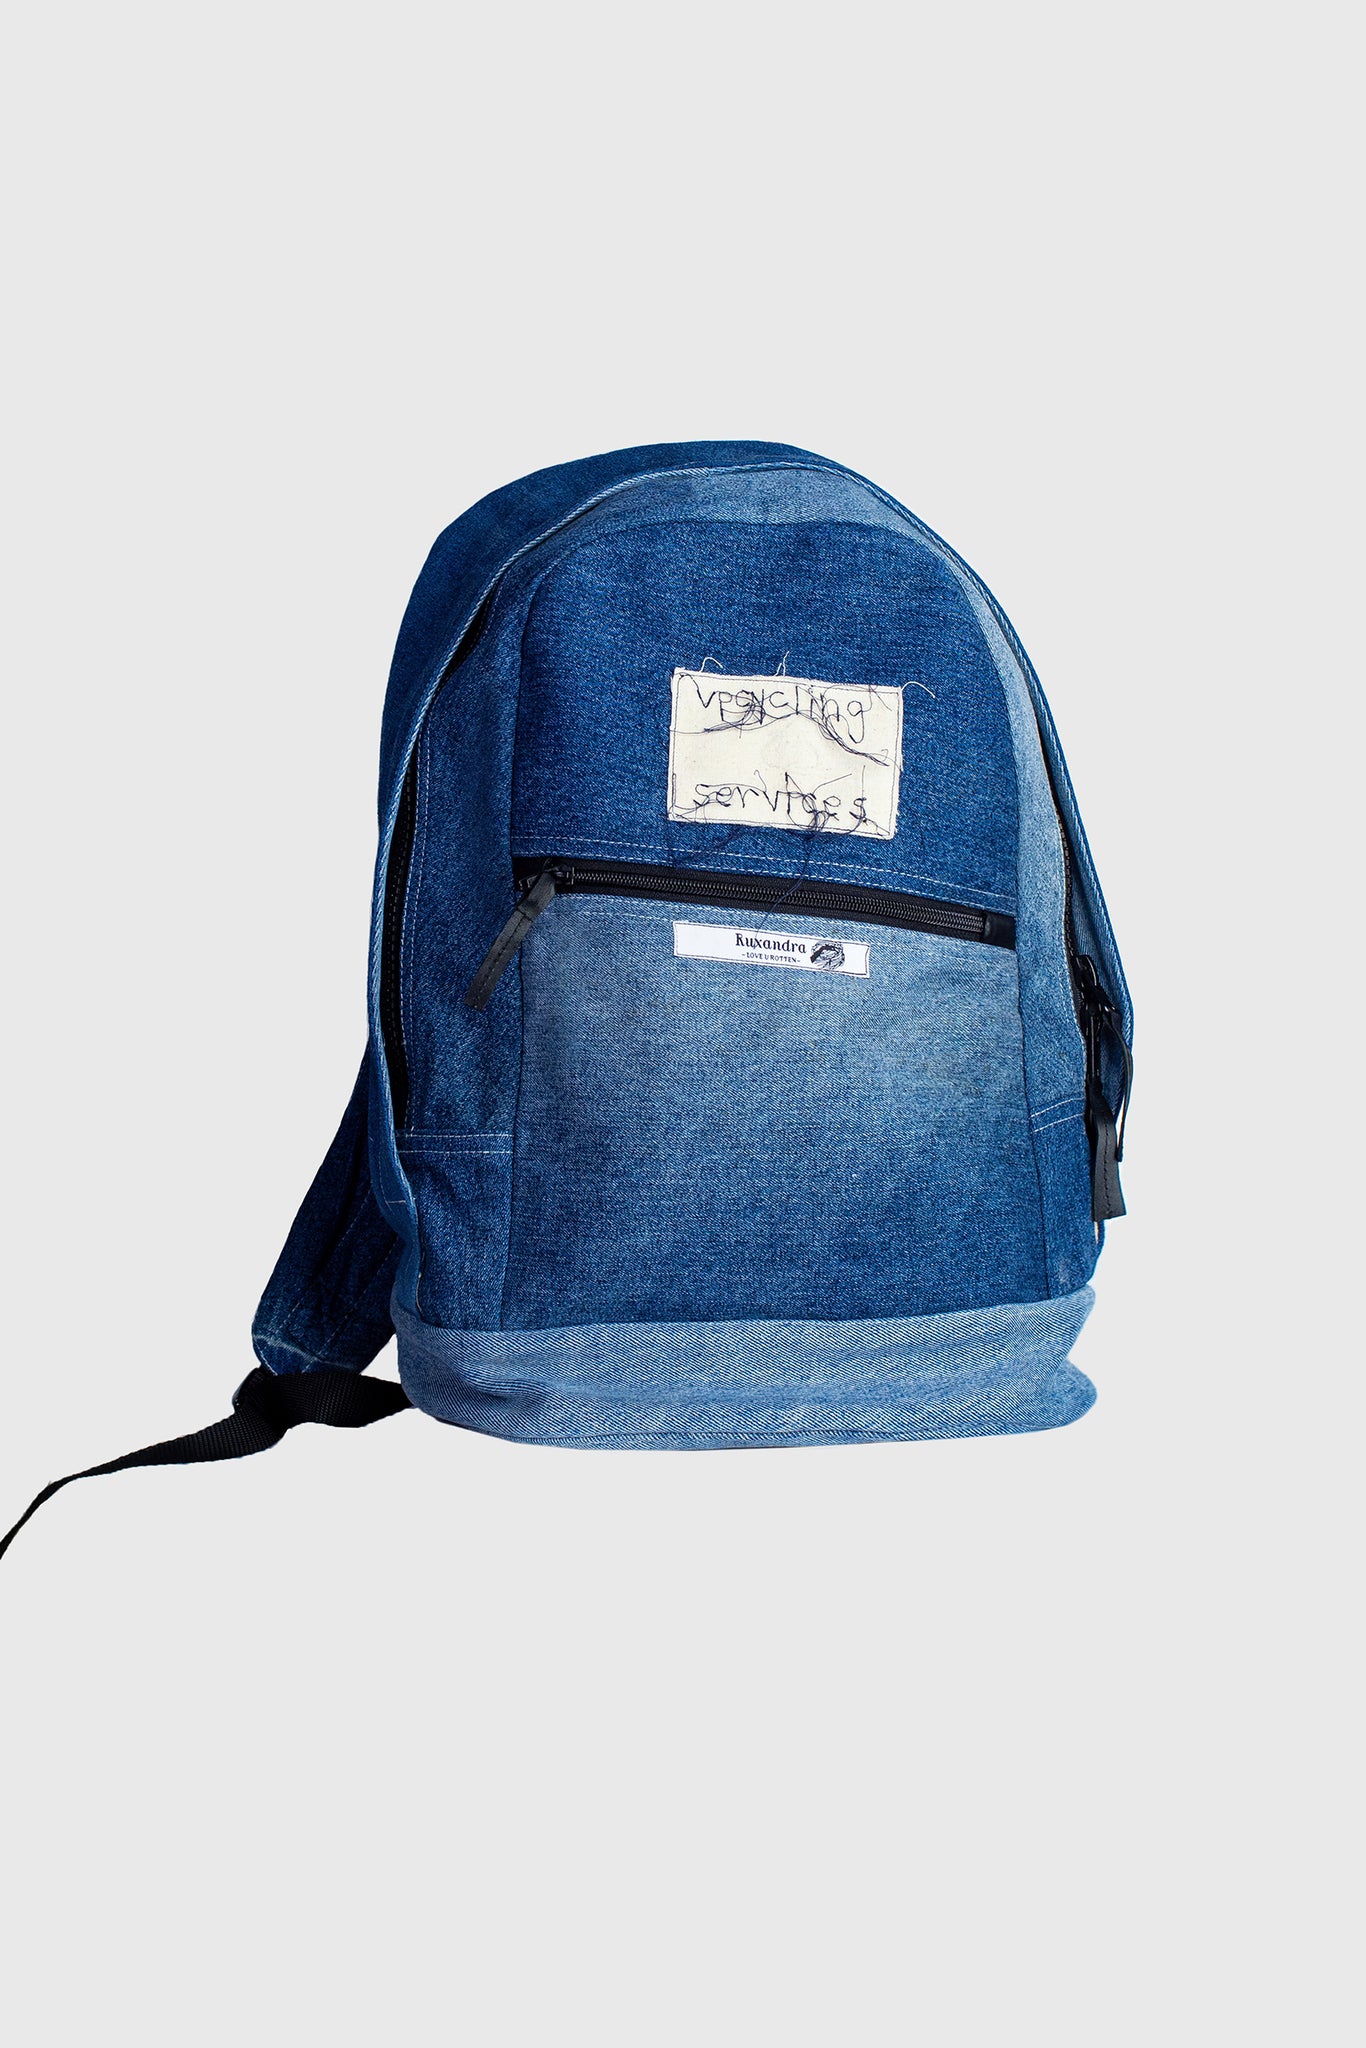 denim backpack, with a twist, created from upcycled vintage jeans, repurposed and contemporary, sustainable spirit, impressive detailing, cotton backpack, denim blue, repurposed, style with any jeans or denim jacket